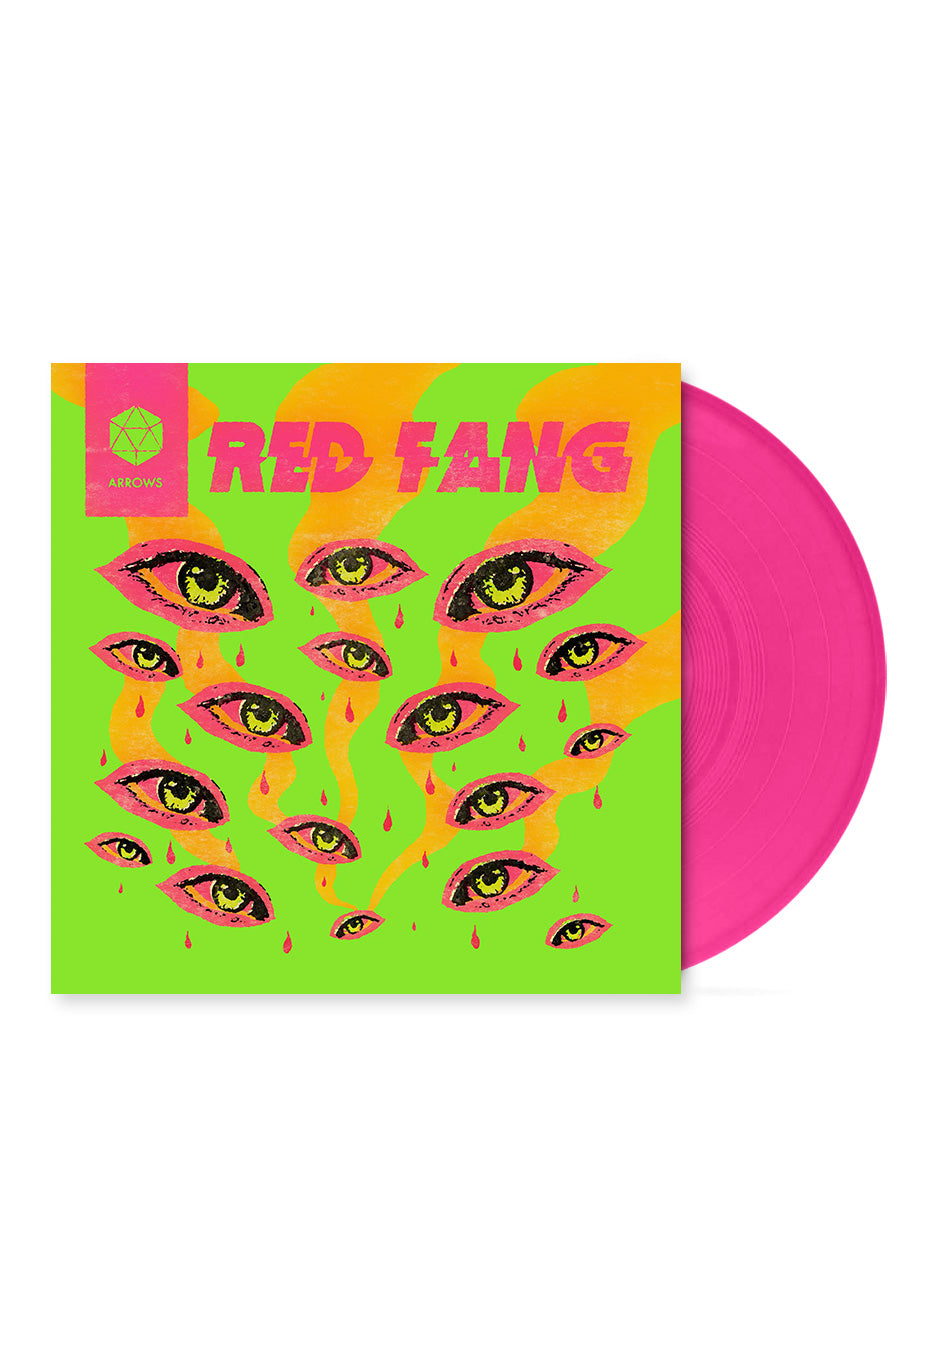 Red Fang - Arrows (Limited Edition on Neon Magenta Vinyl)